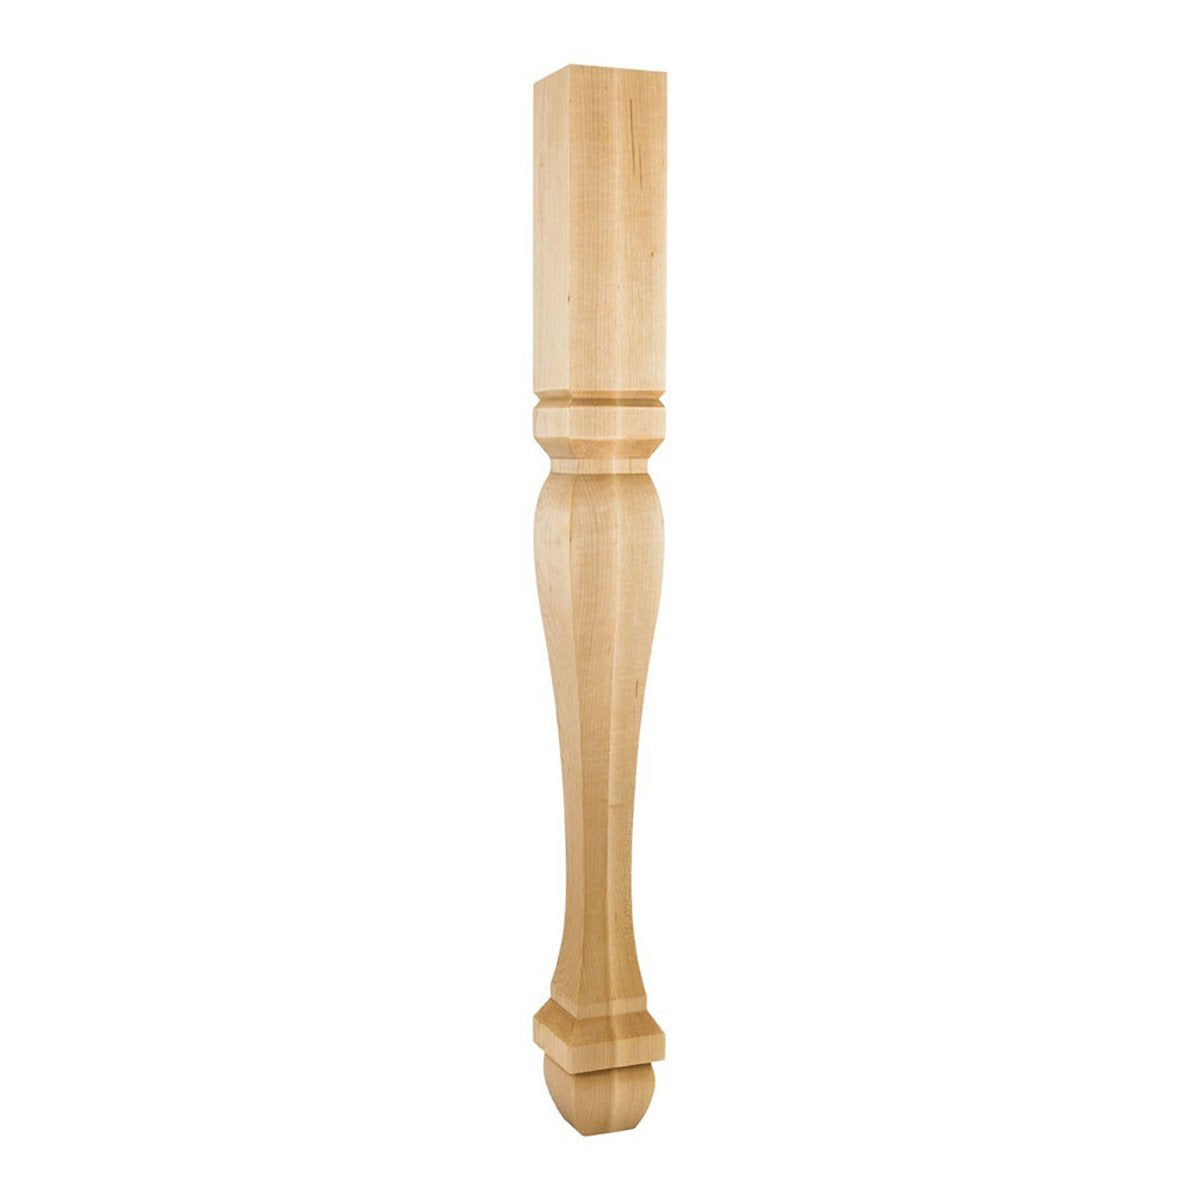 Hardware Resources 3-1/2" x 3-1/2" x 35-1/2" Square Rubberwood Post / Table Leg with Foot-DirectSinks